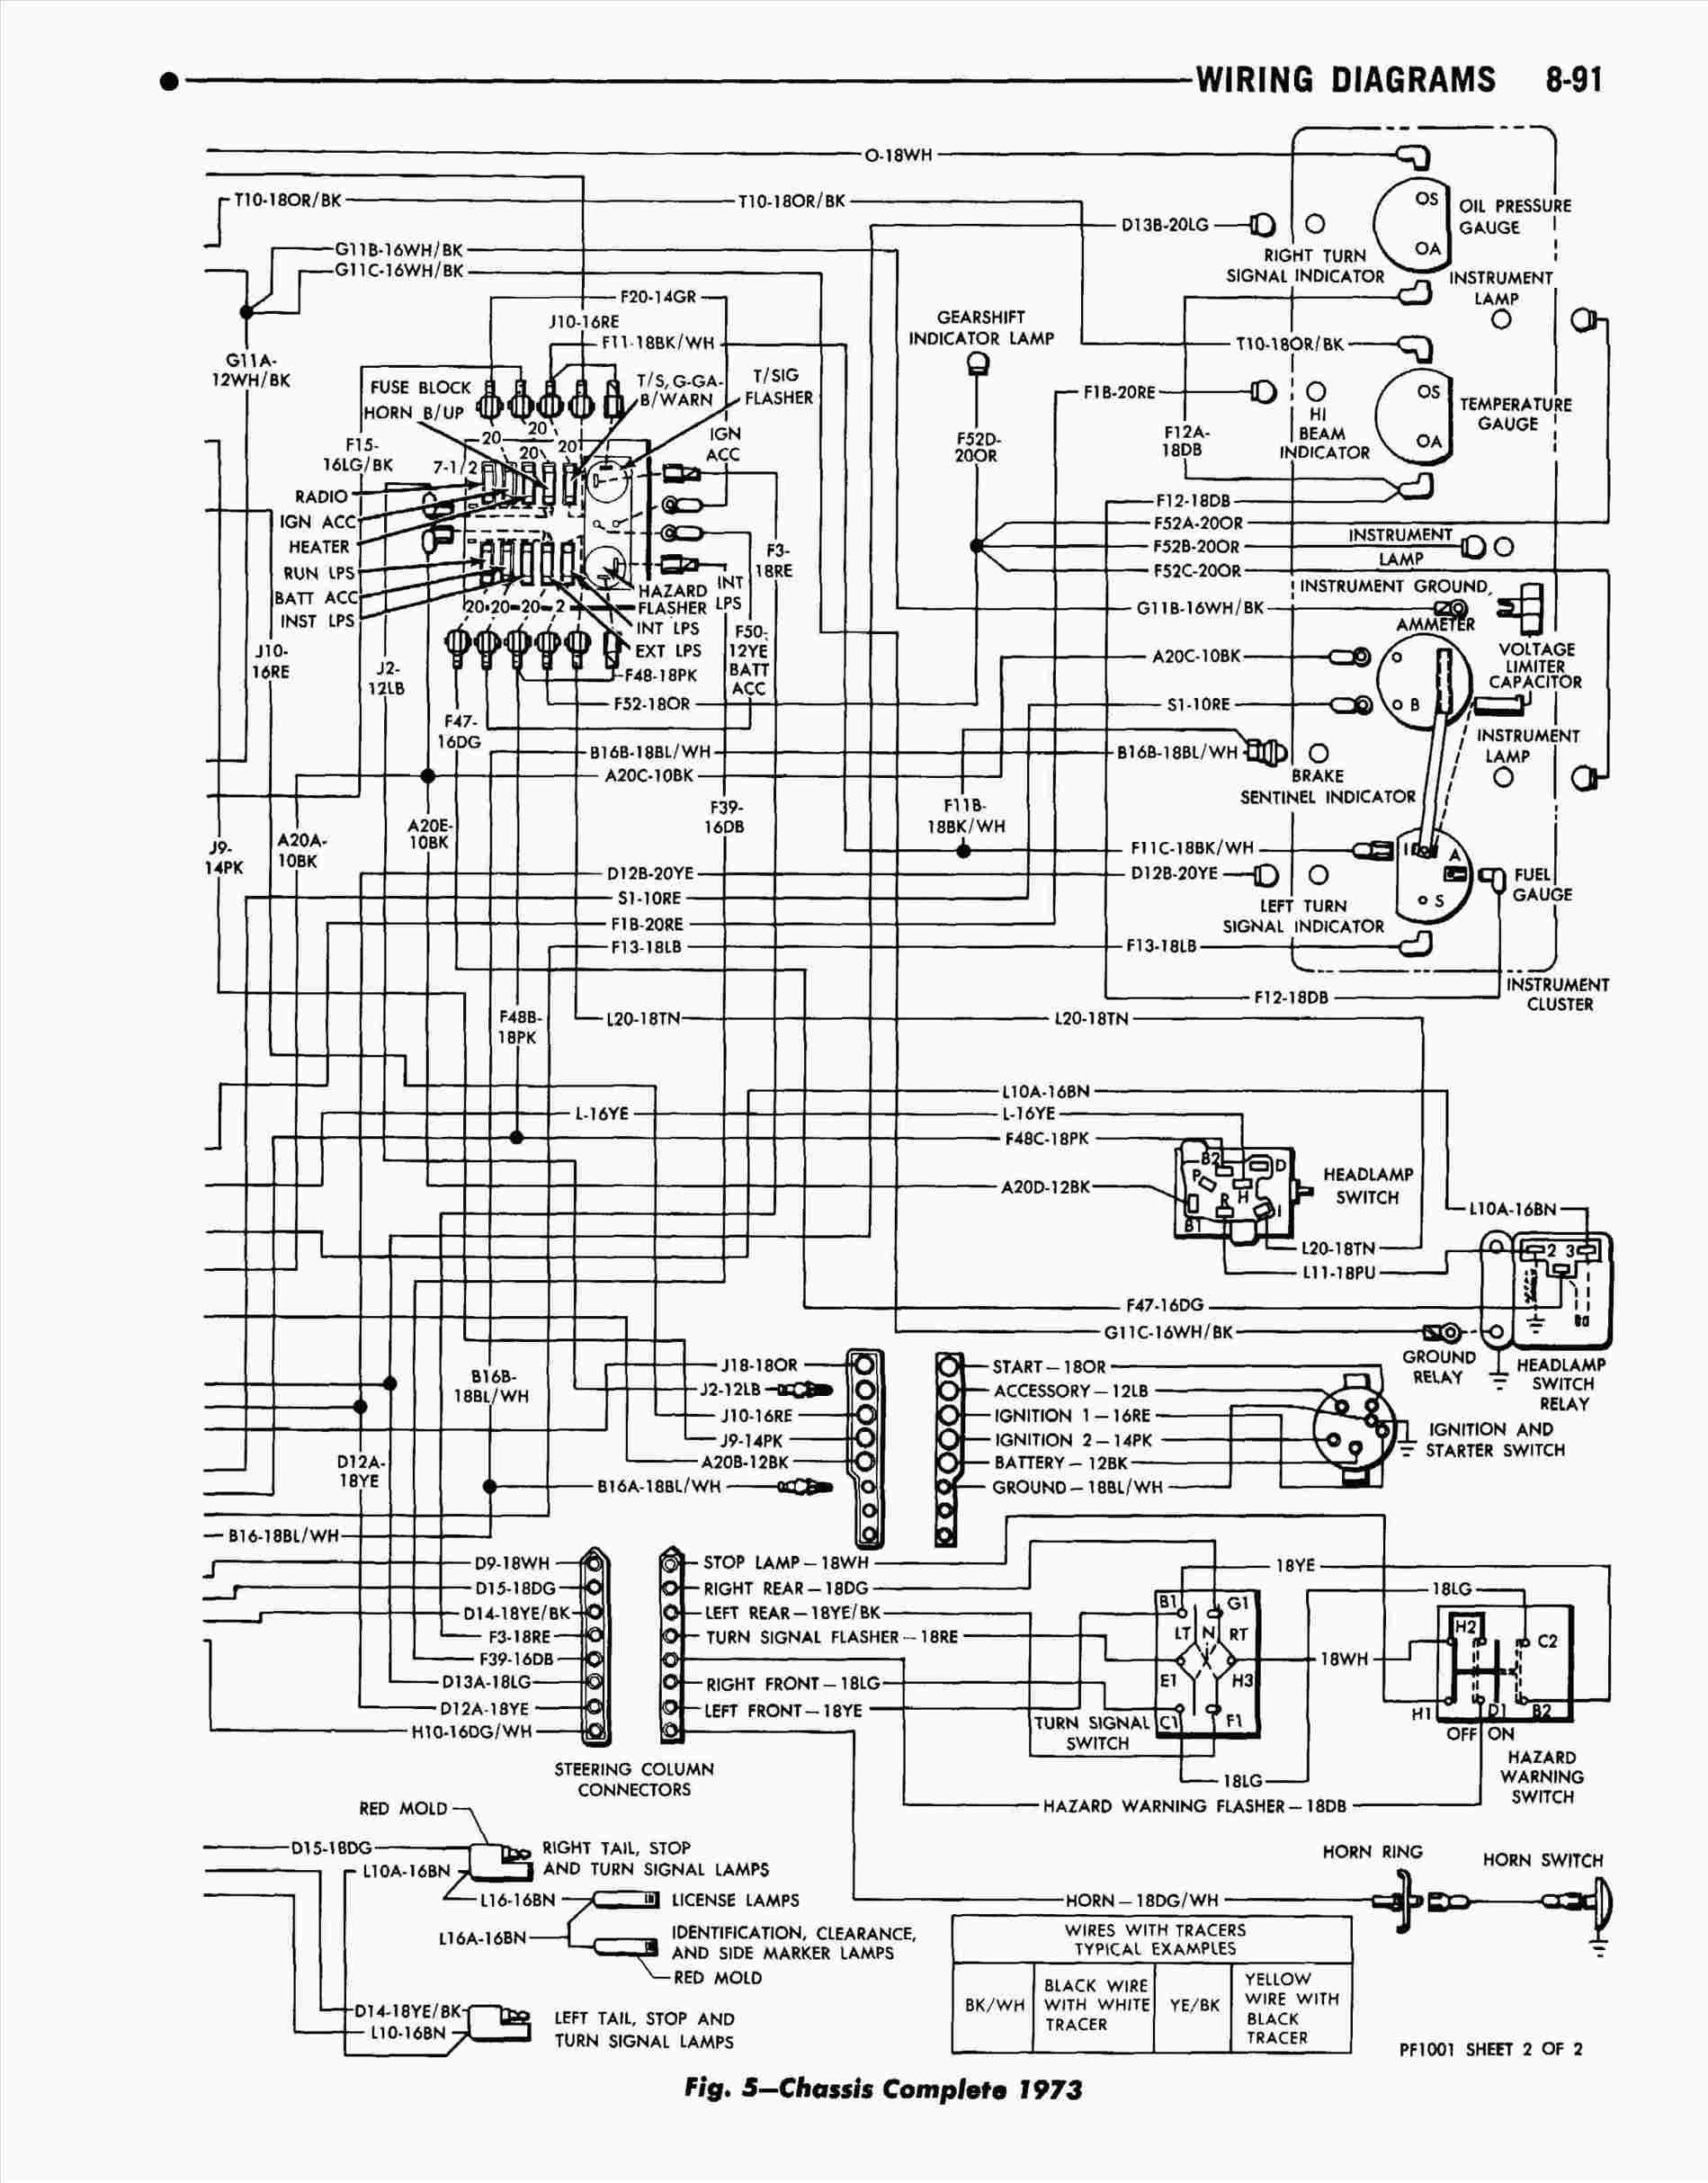 Forest River Rv Wiring Diagrams | Wiring Diagram - Forest River Wiring Diagram